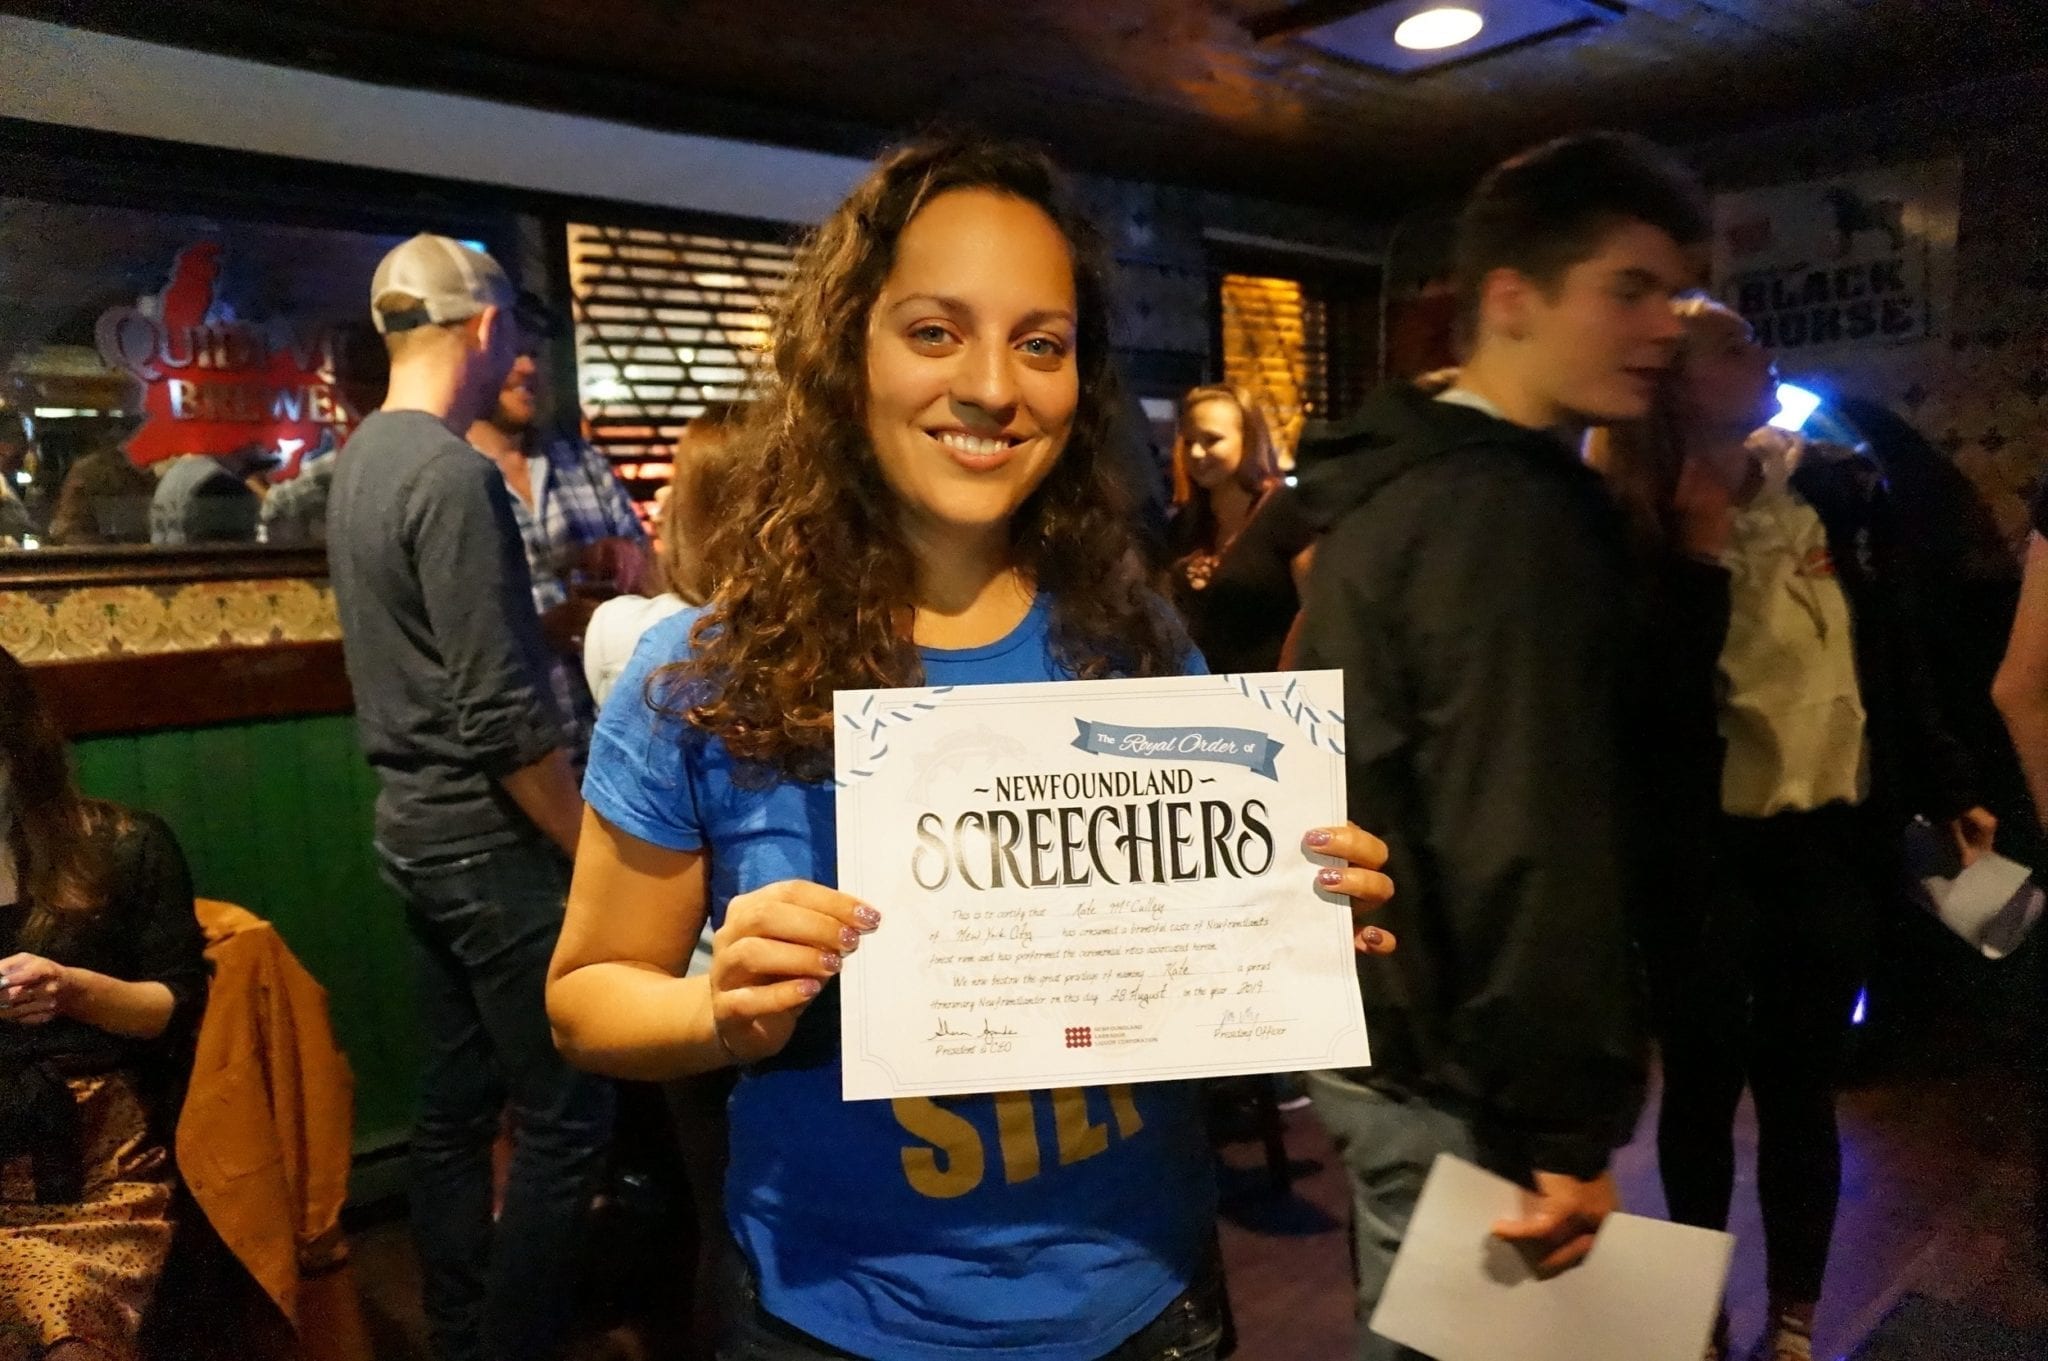 Kate stands in a bar holding a certificate that says "SCREECHERS".